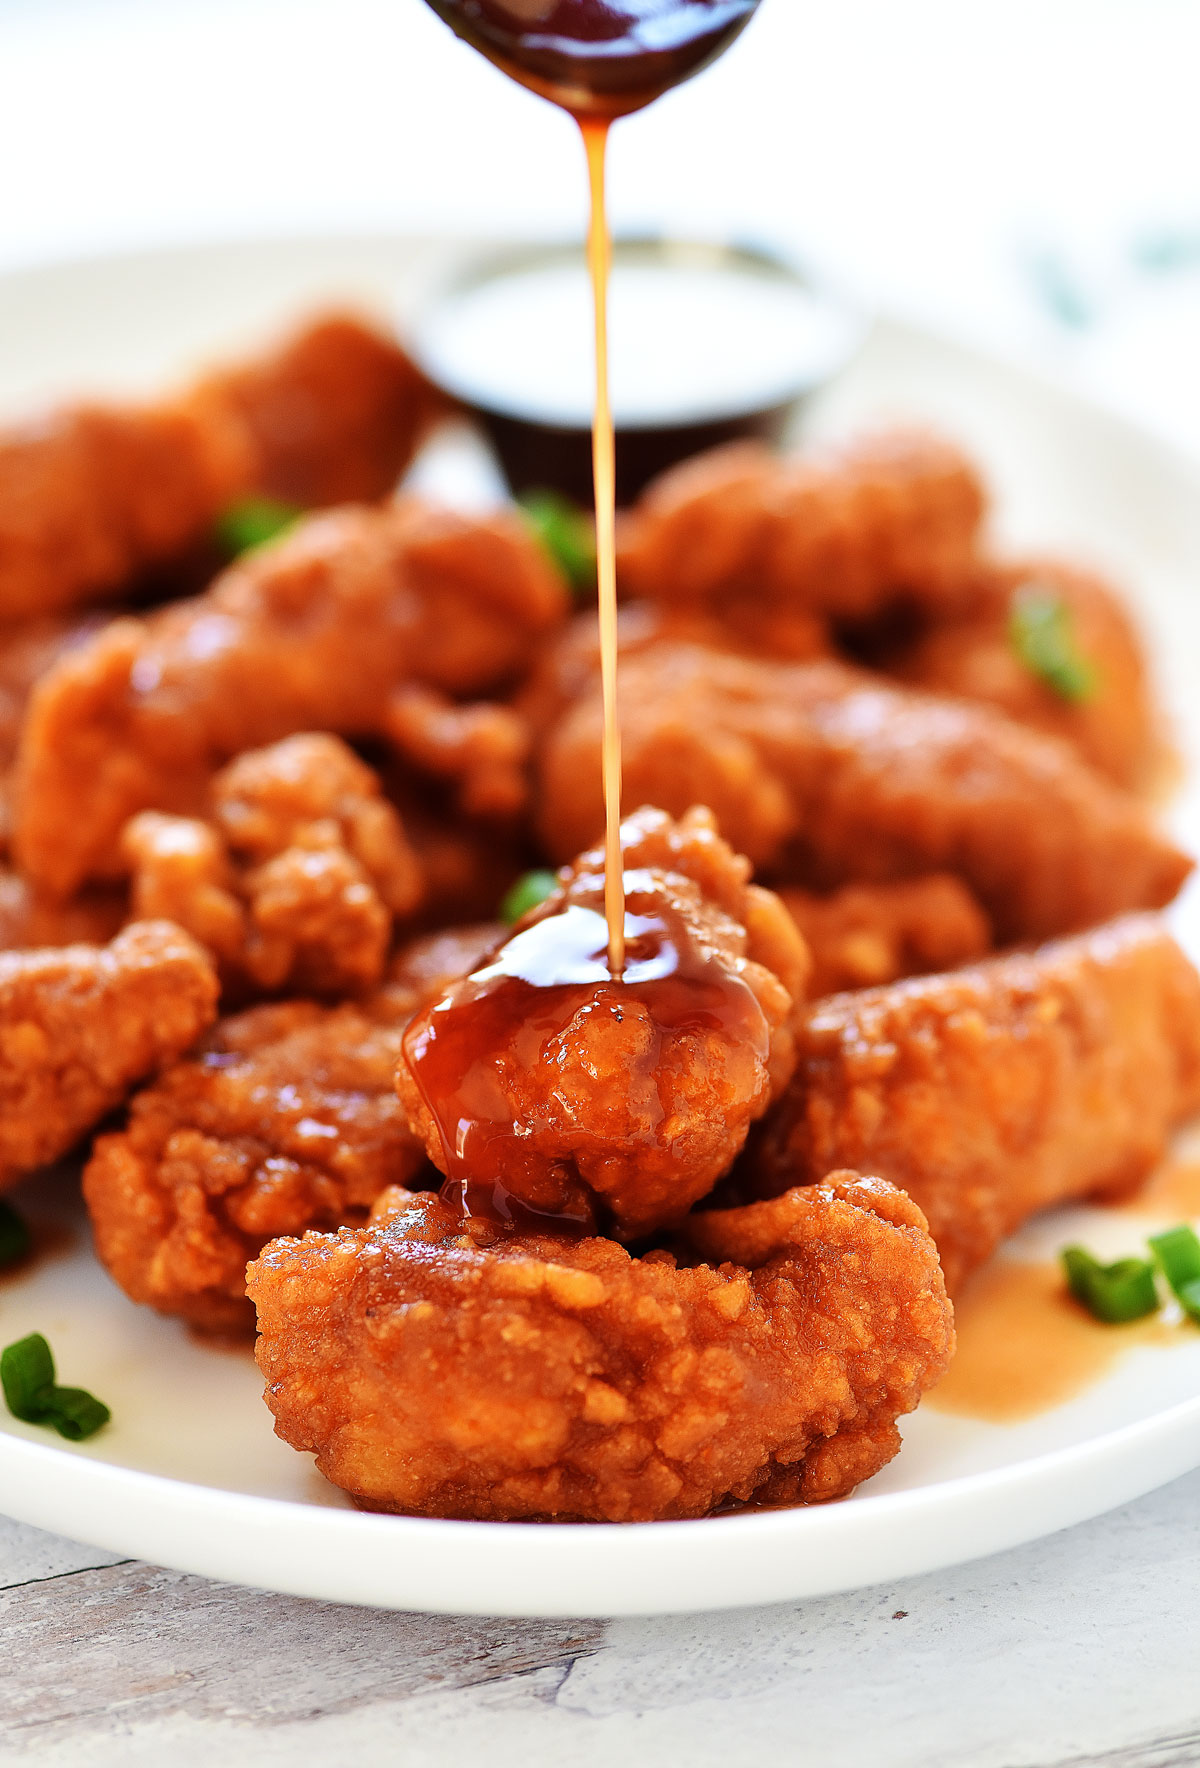 Sticky Chicken Fingers are crispy chicken tenders coated in a sweet and spicy glaze. Life-in-the-Lofthouse.com